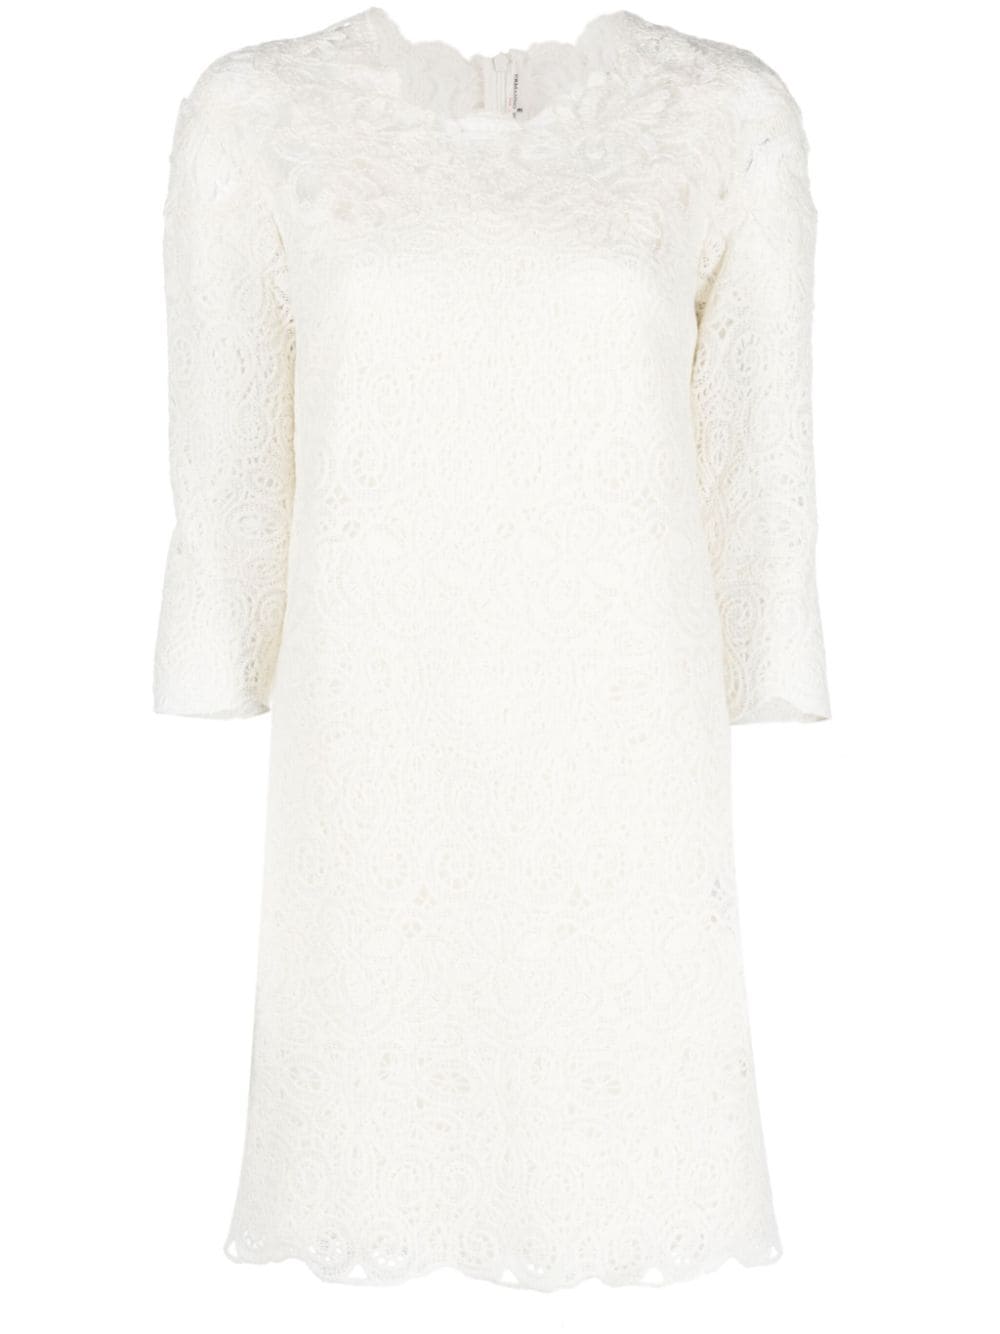 ERMANNO SCERVINO Chic and Sophisticated White Lace Dress